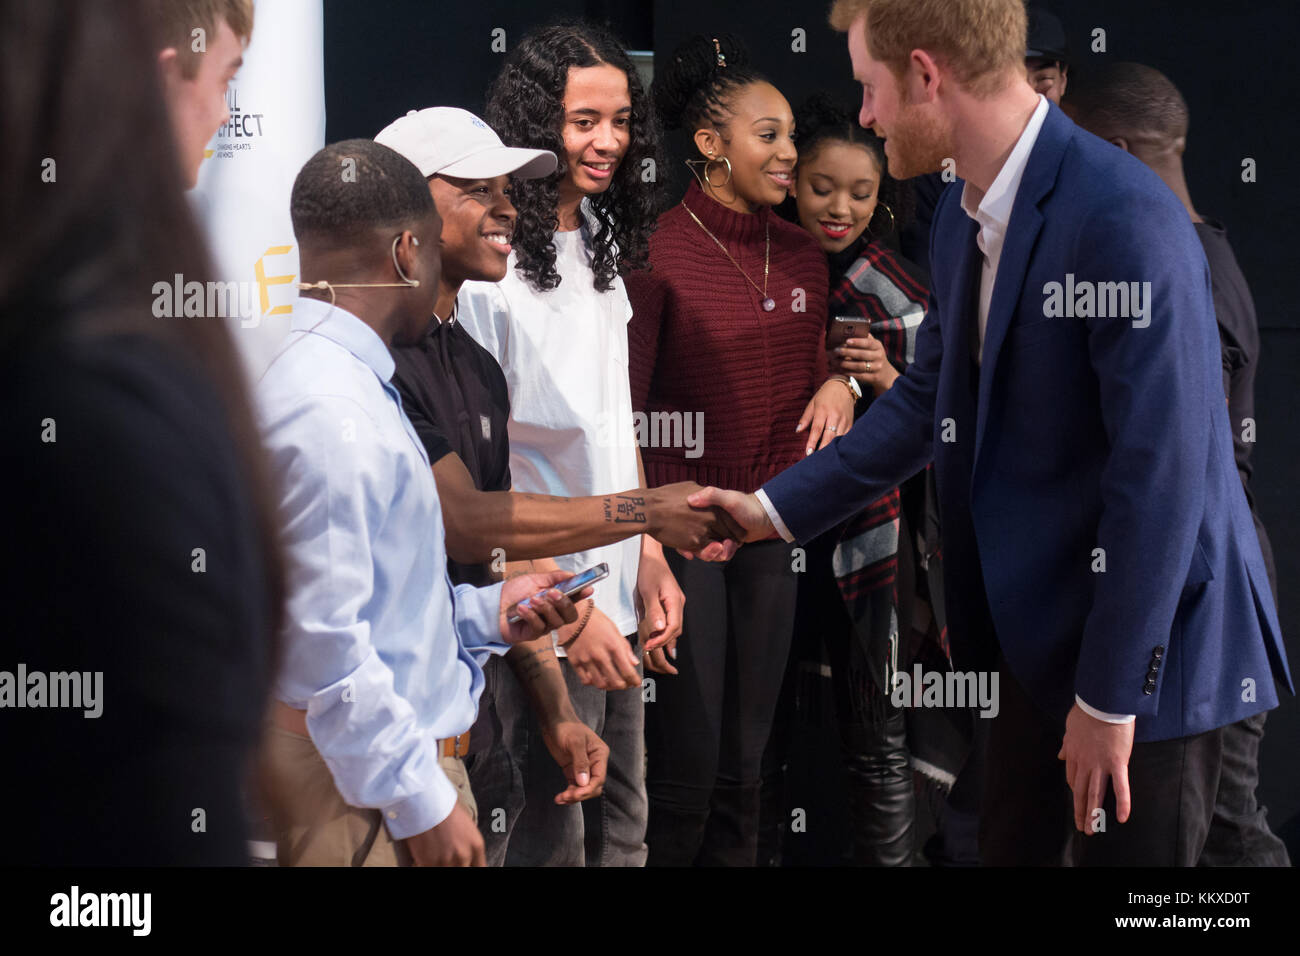 Nottingham, UK. 1st Dec, 2017. Prince Harry and his fiancee US actress Meghan Markle pose for a photograph with the cast and crew of a hip hop opera performed by young people involved in the Full Effect programme at the Nottingham Academy school December 1, 2017 in Nottingham, England. Credit: jamal sterrett/Alamy Live News Stock Photo